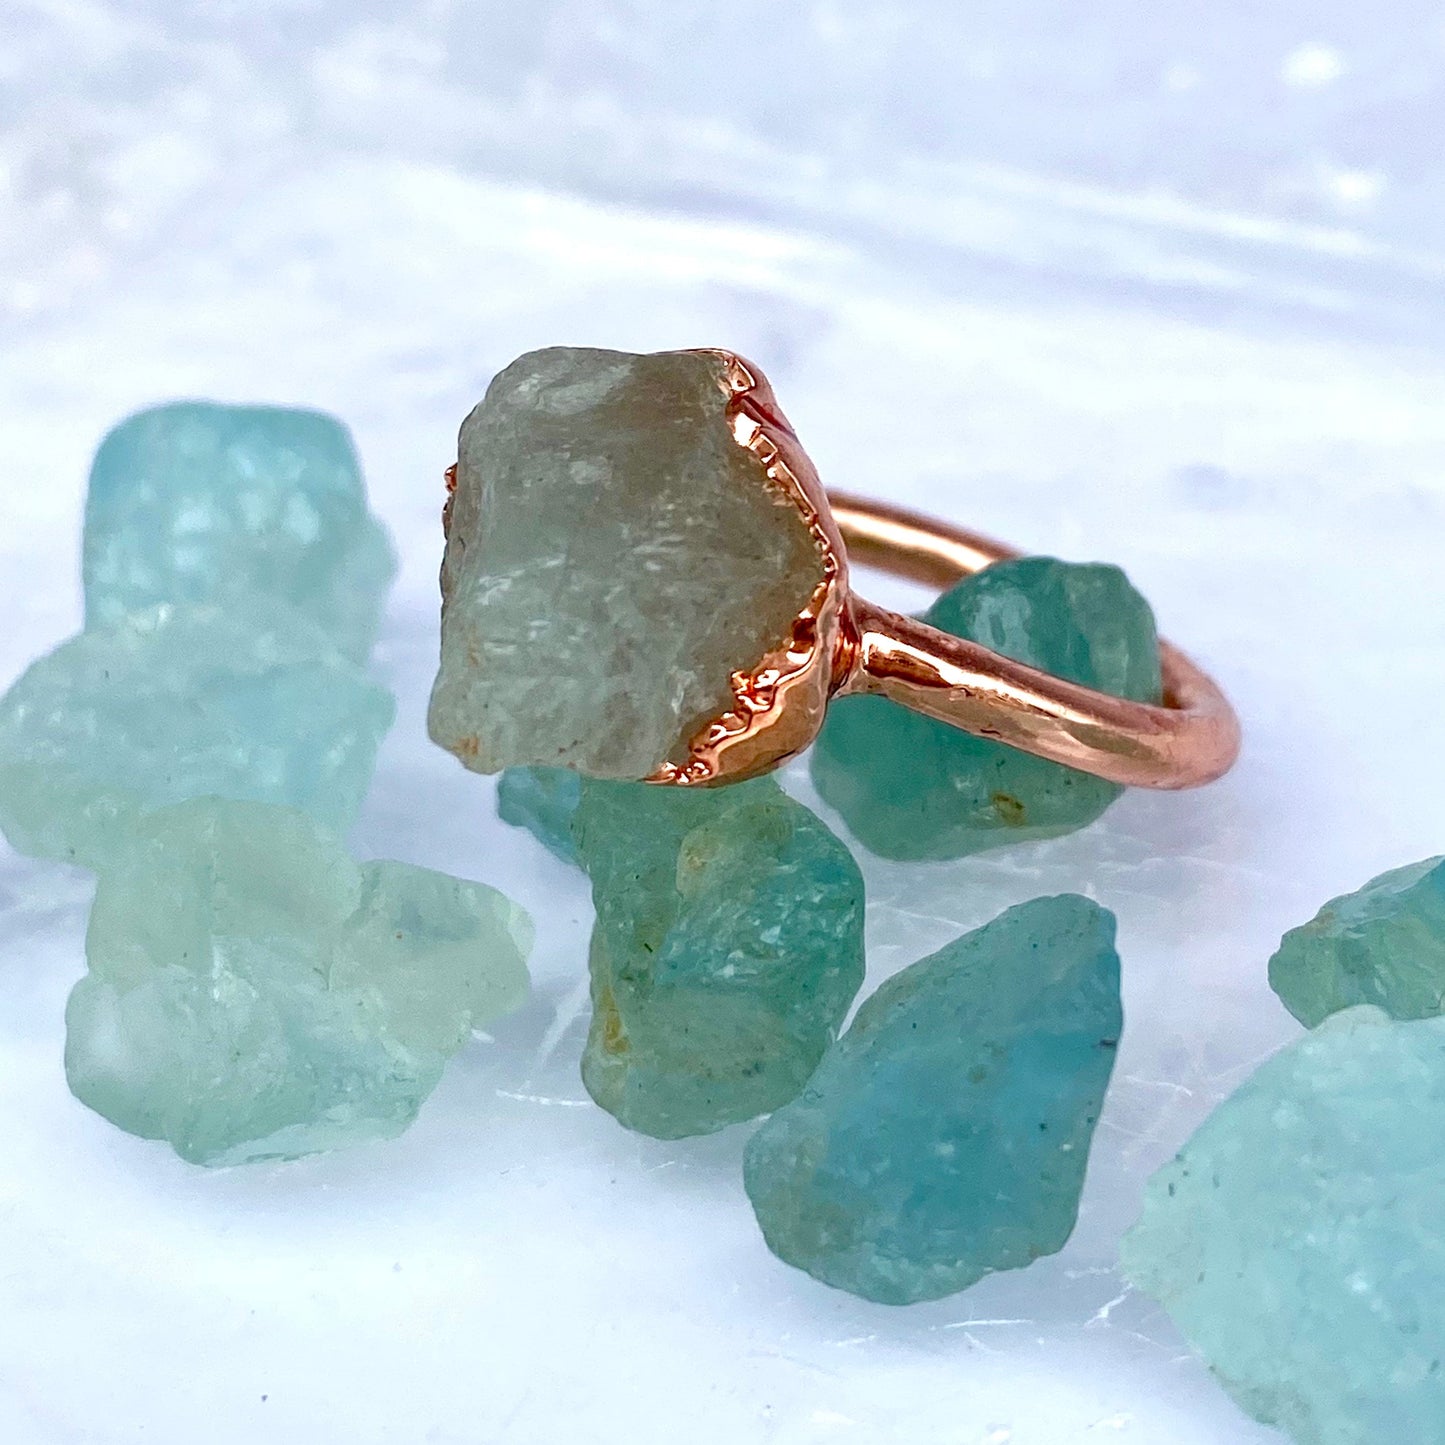 Aquamarine Crystal Ring Copper Electroformed in Rose Gold, March Birthstone Gemstone Jewelry Gift for Her